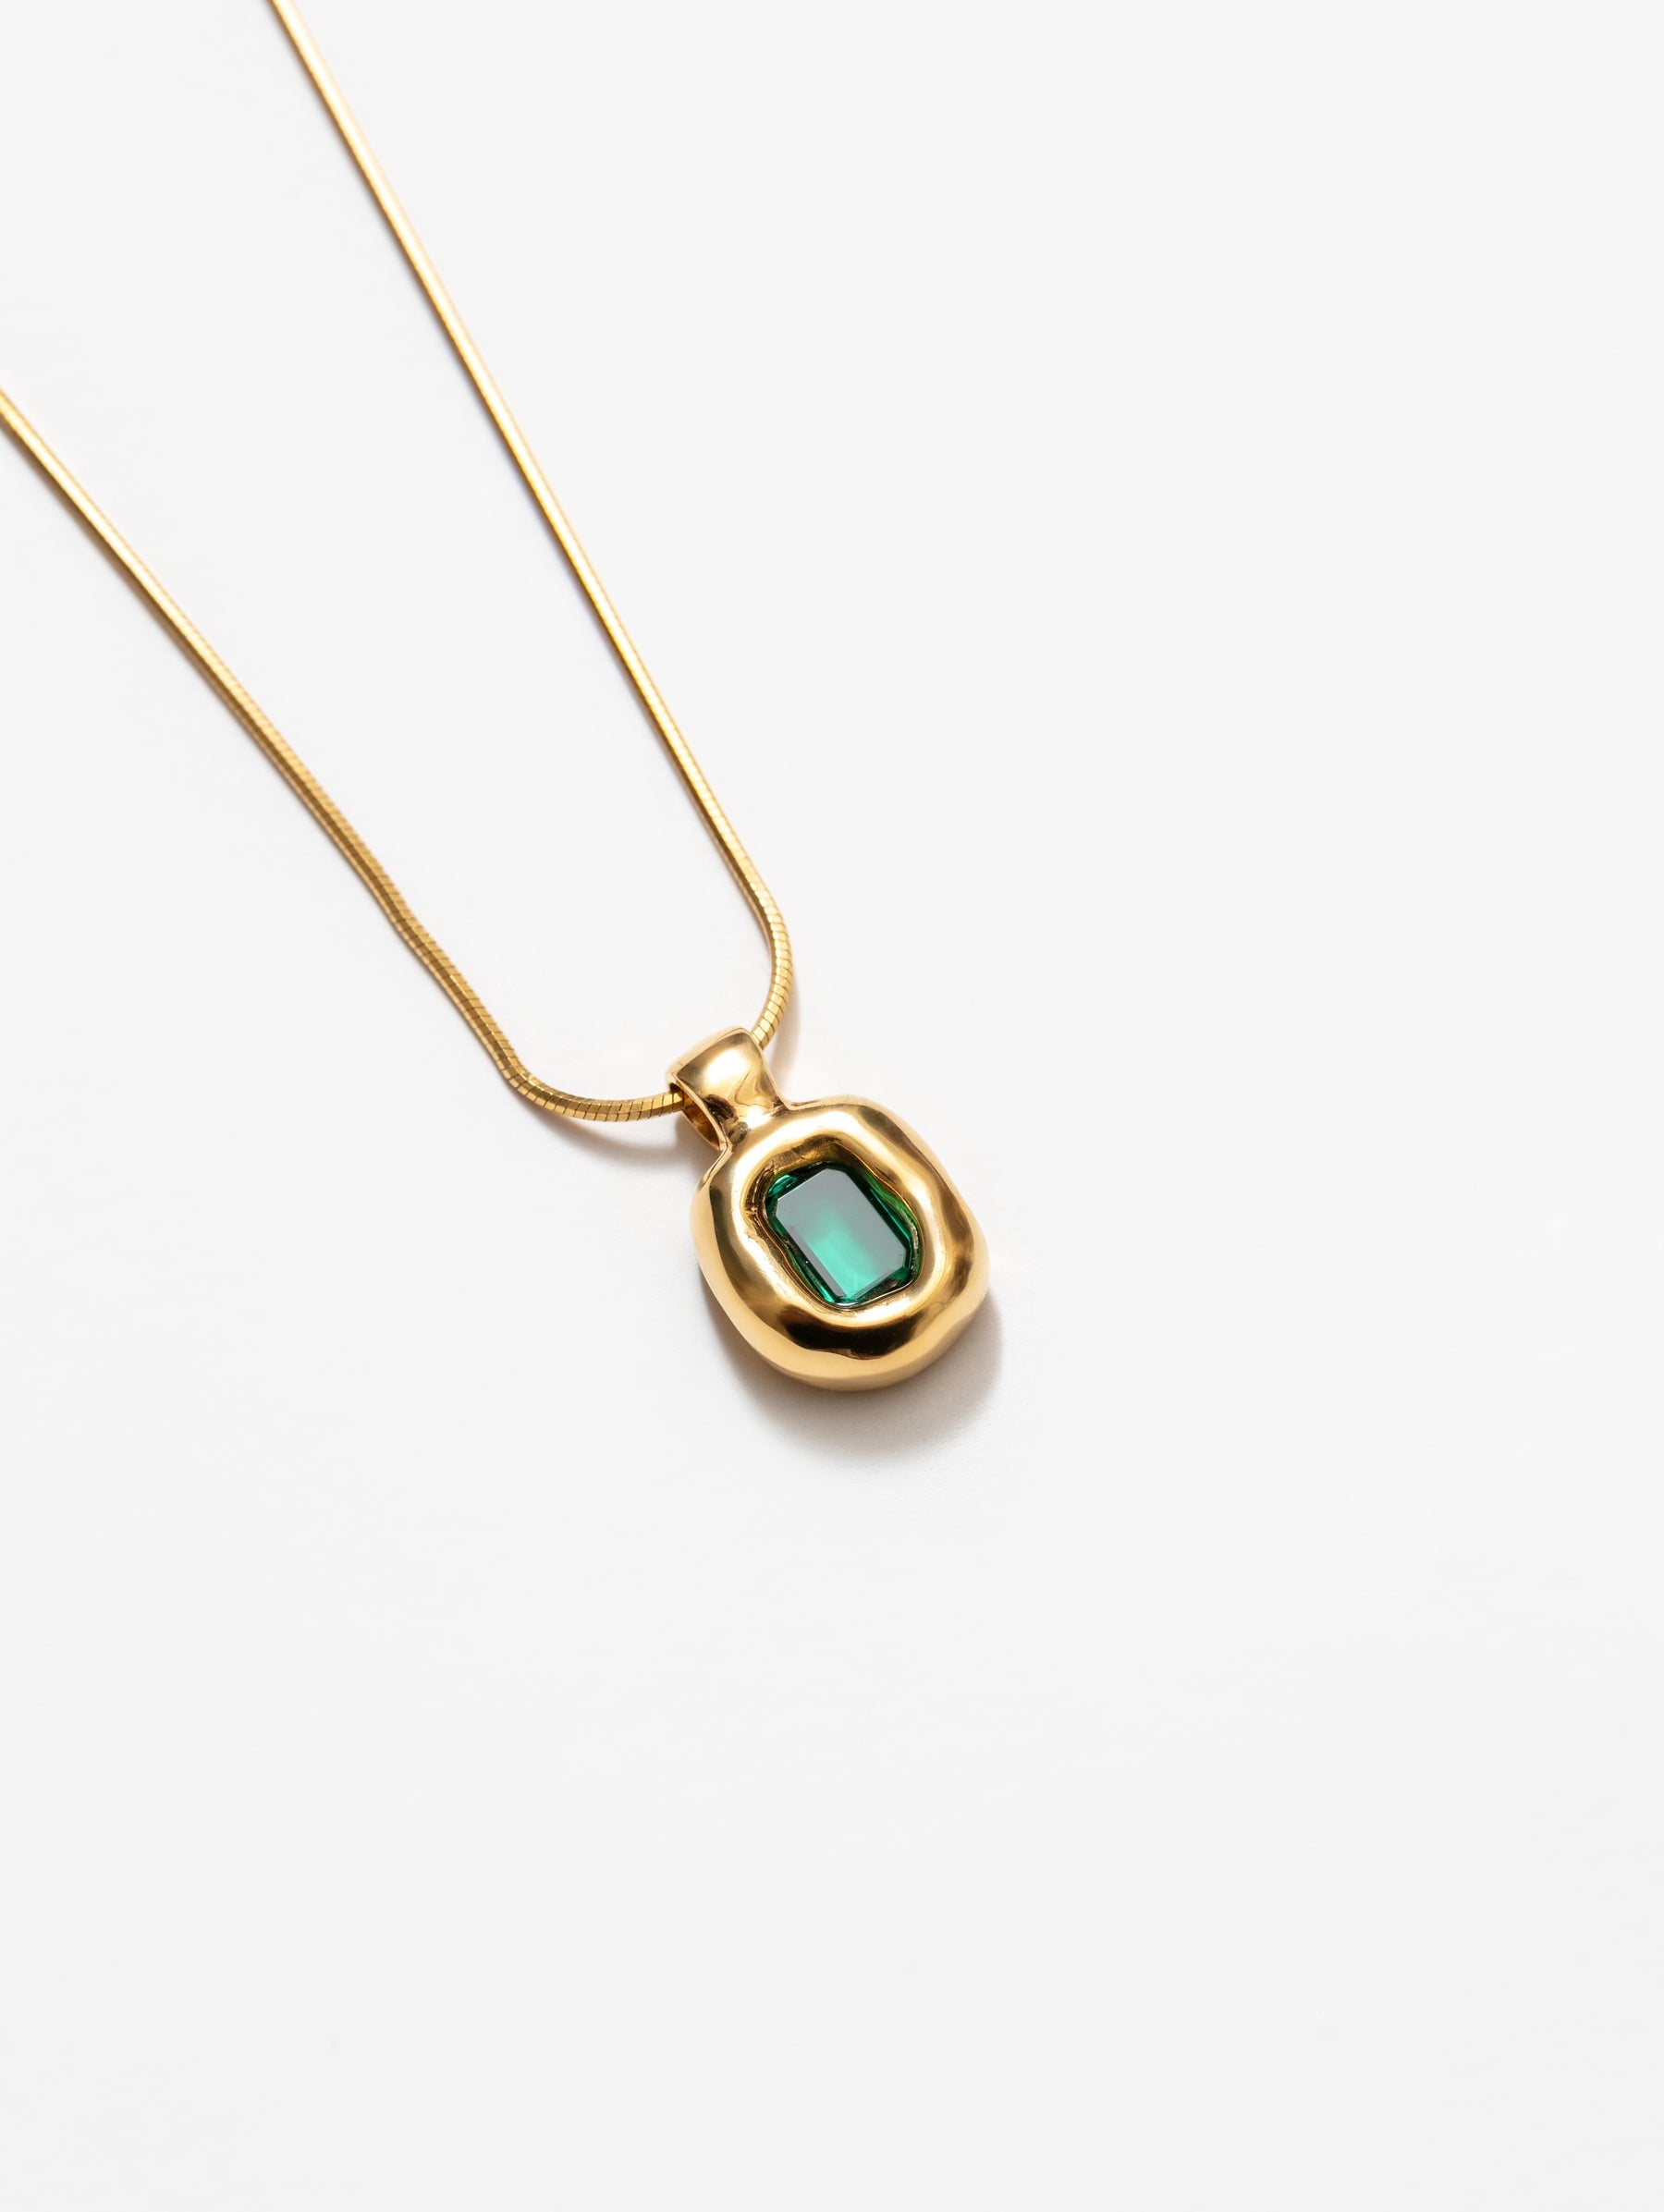 Freya Necklace Green and Gold